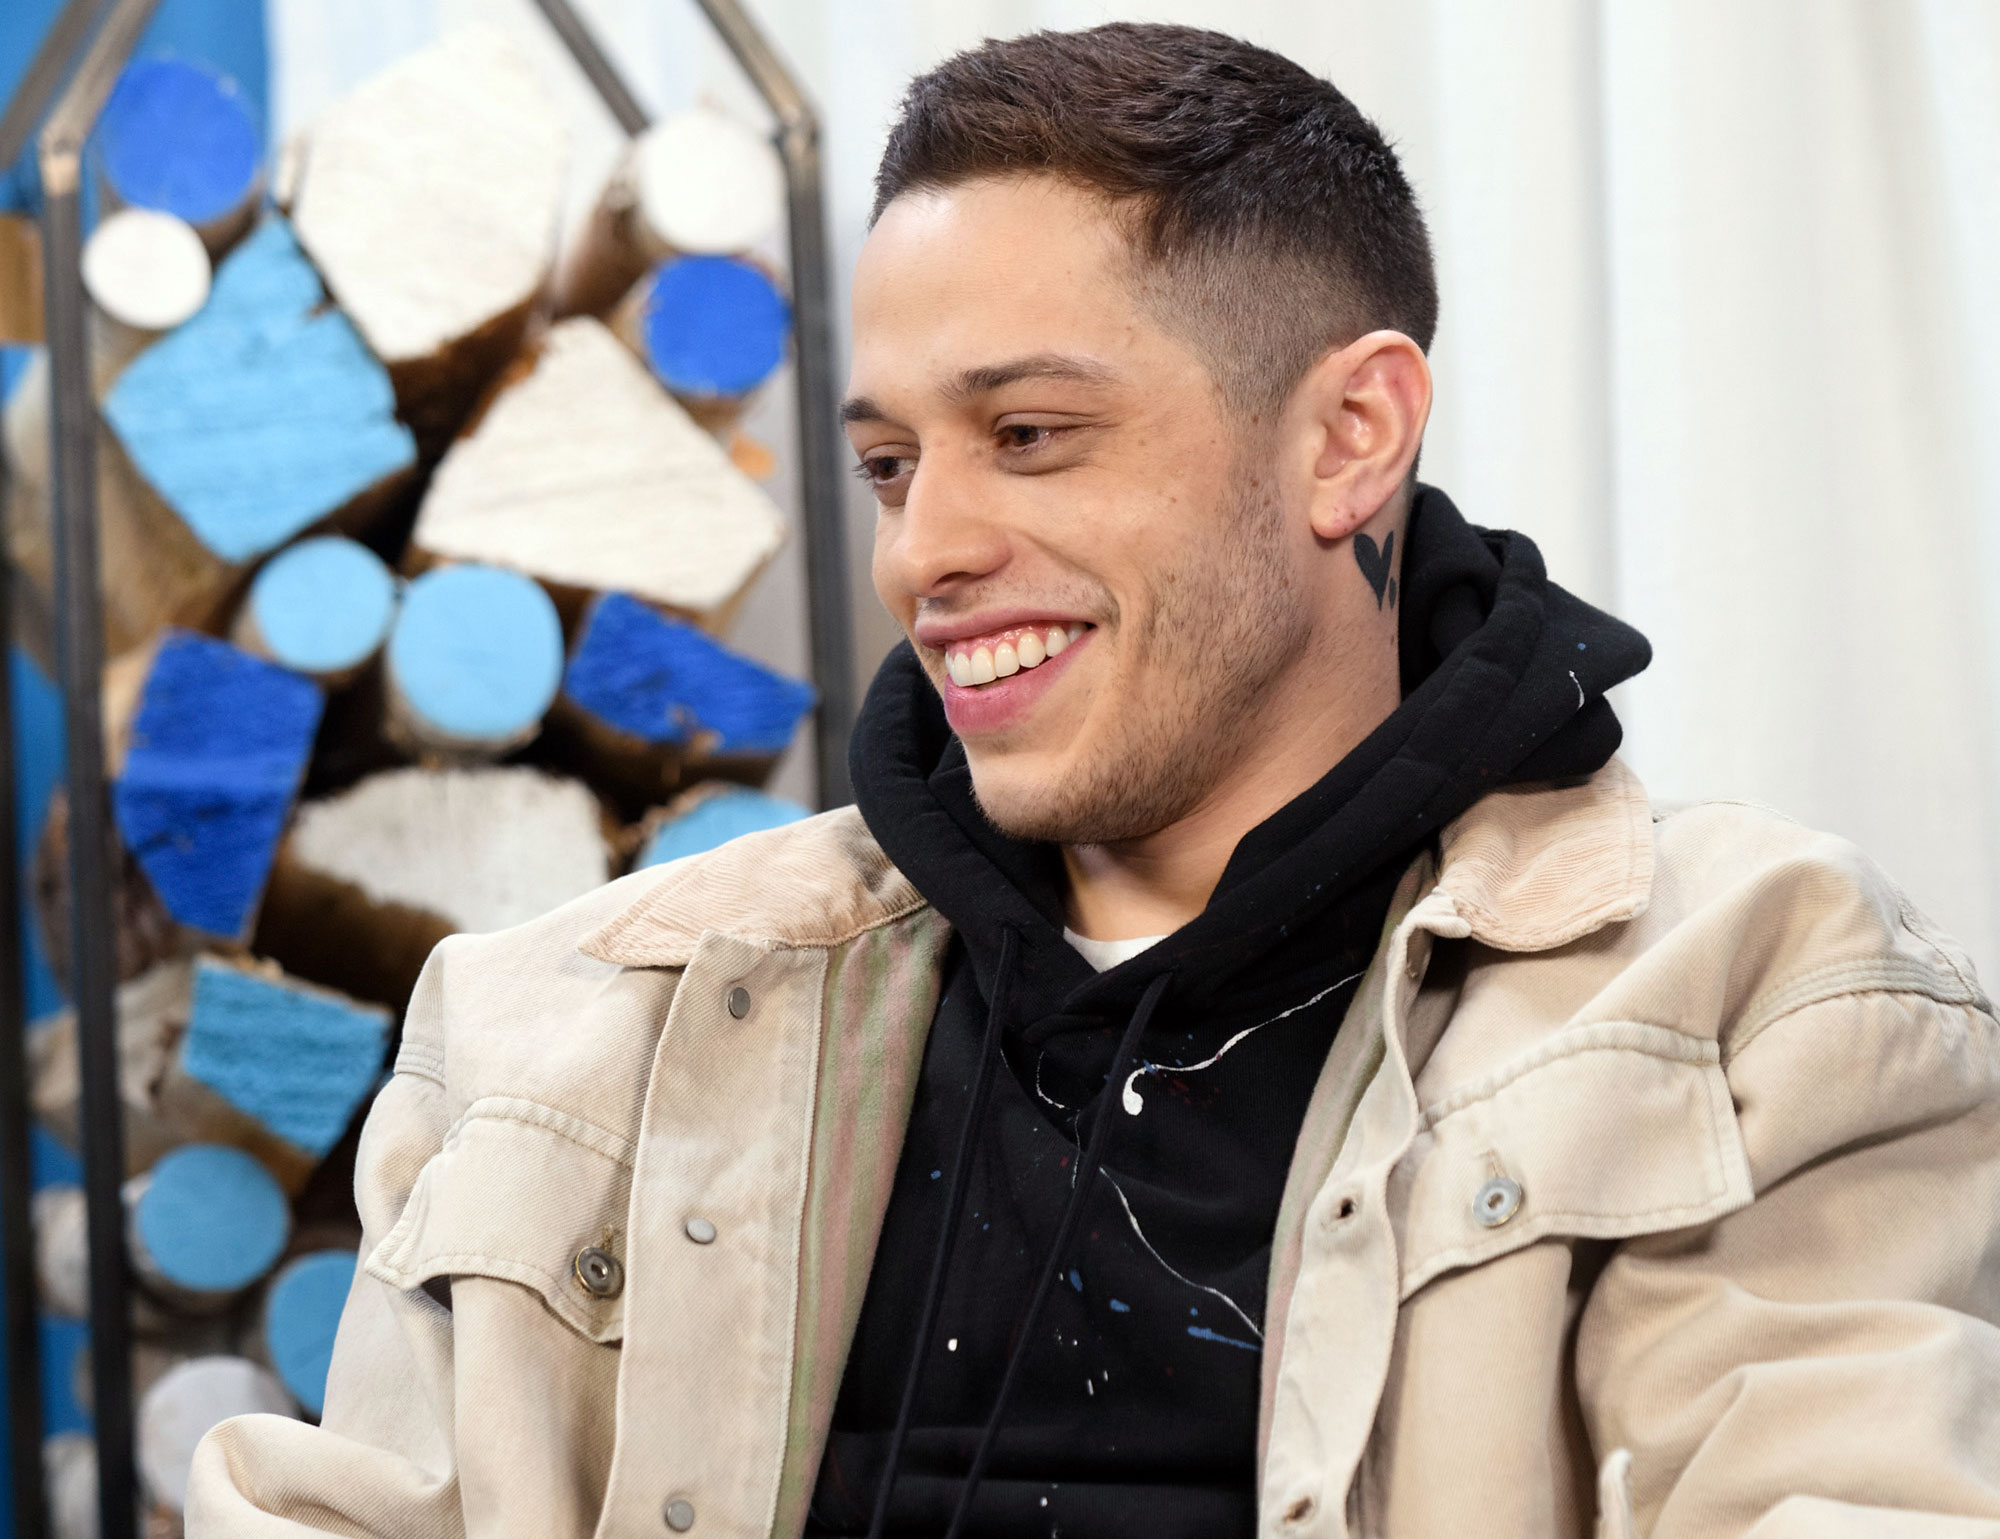 Pete Davidson Covers Ariana Grande-Inspired Tattoo With 'Cursed'